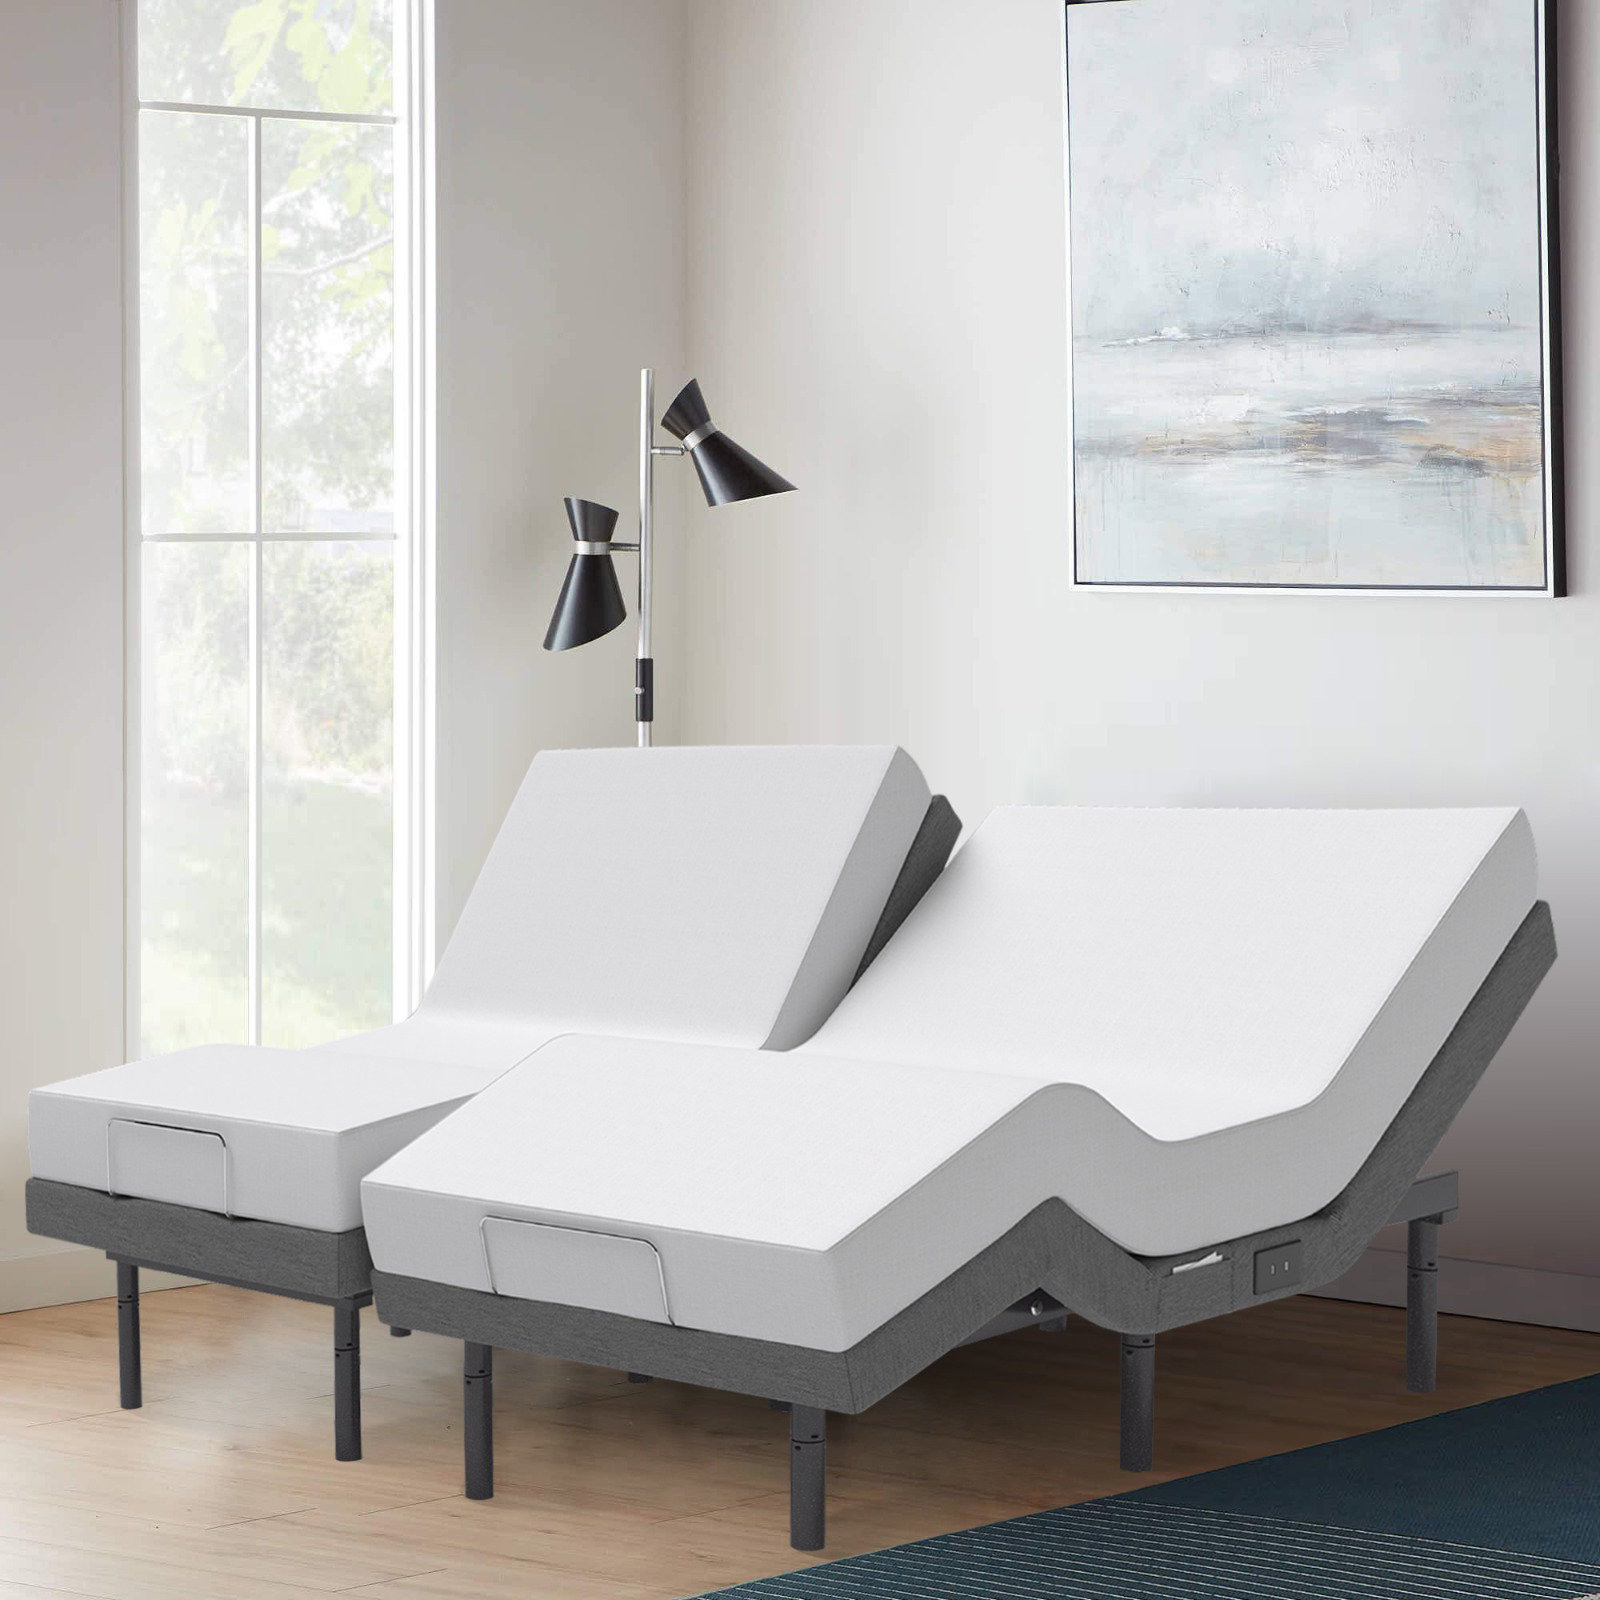 Potwin Zero Clearance Adjustable Bed Frame with Wireless Remote